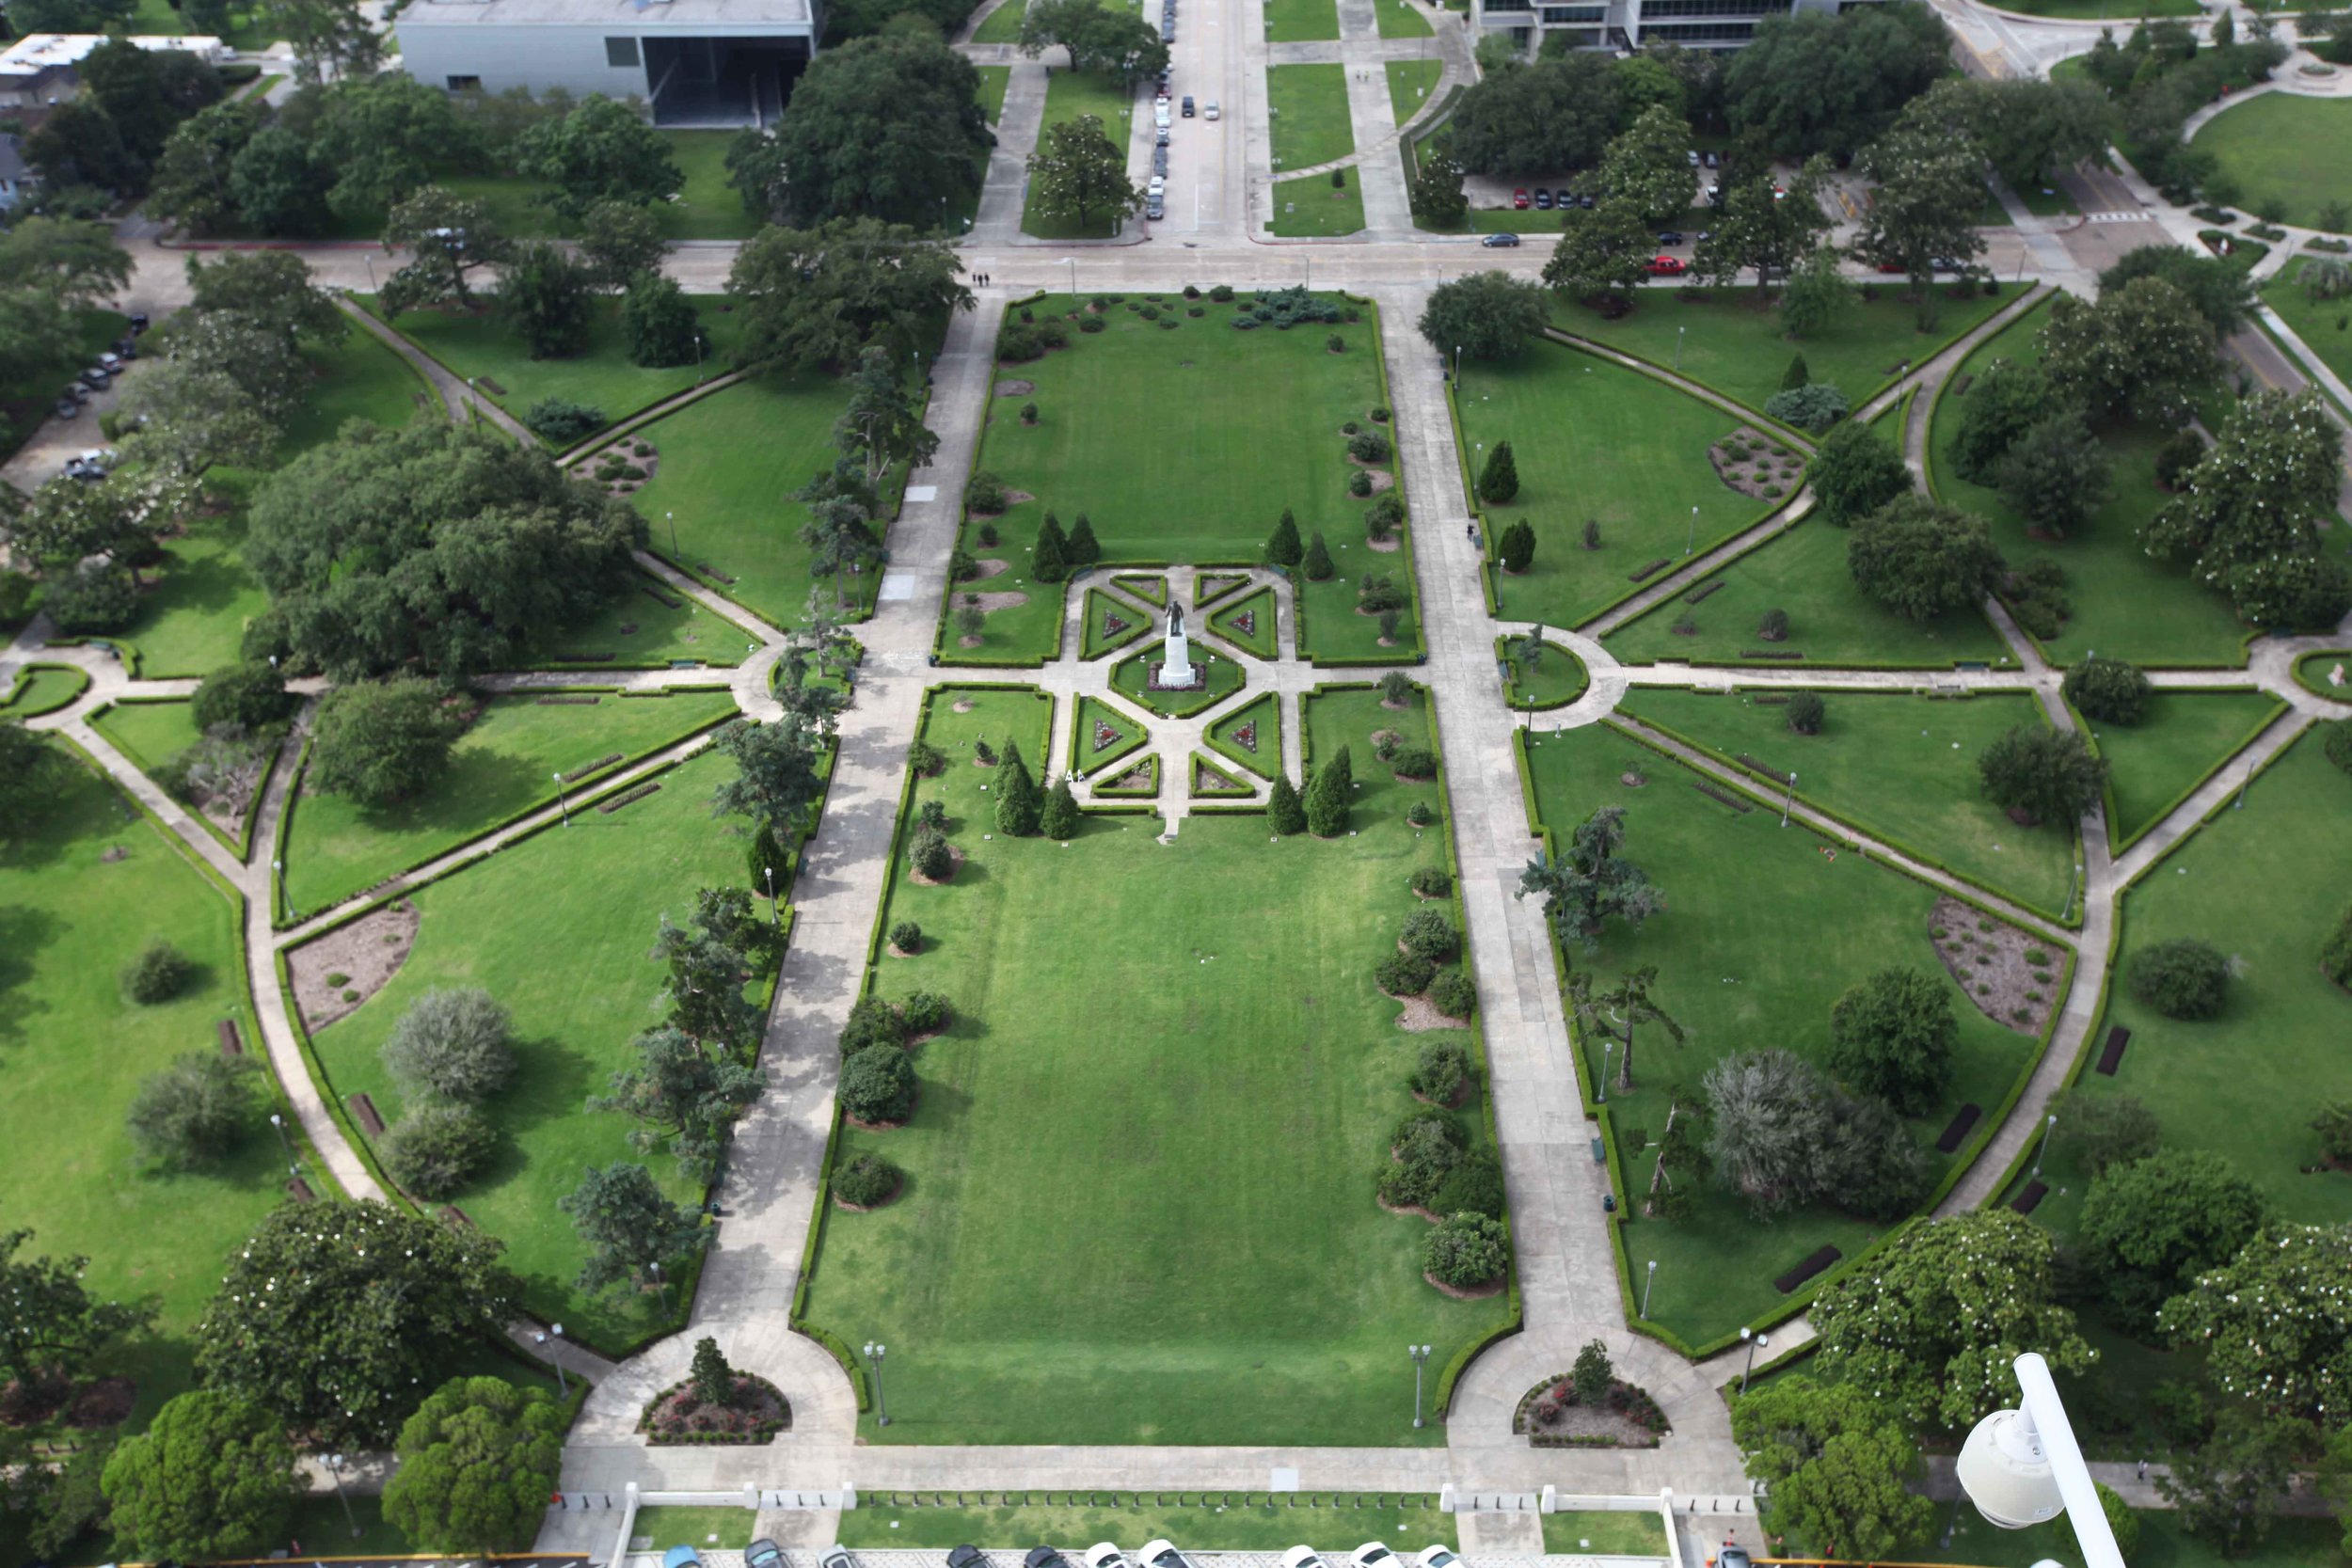  Huey Long's tomb and statue seen from above. 